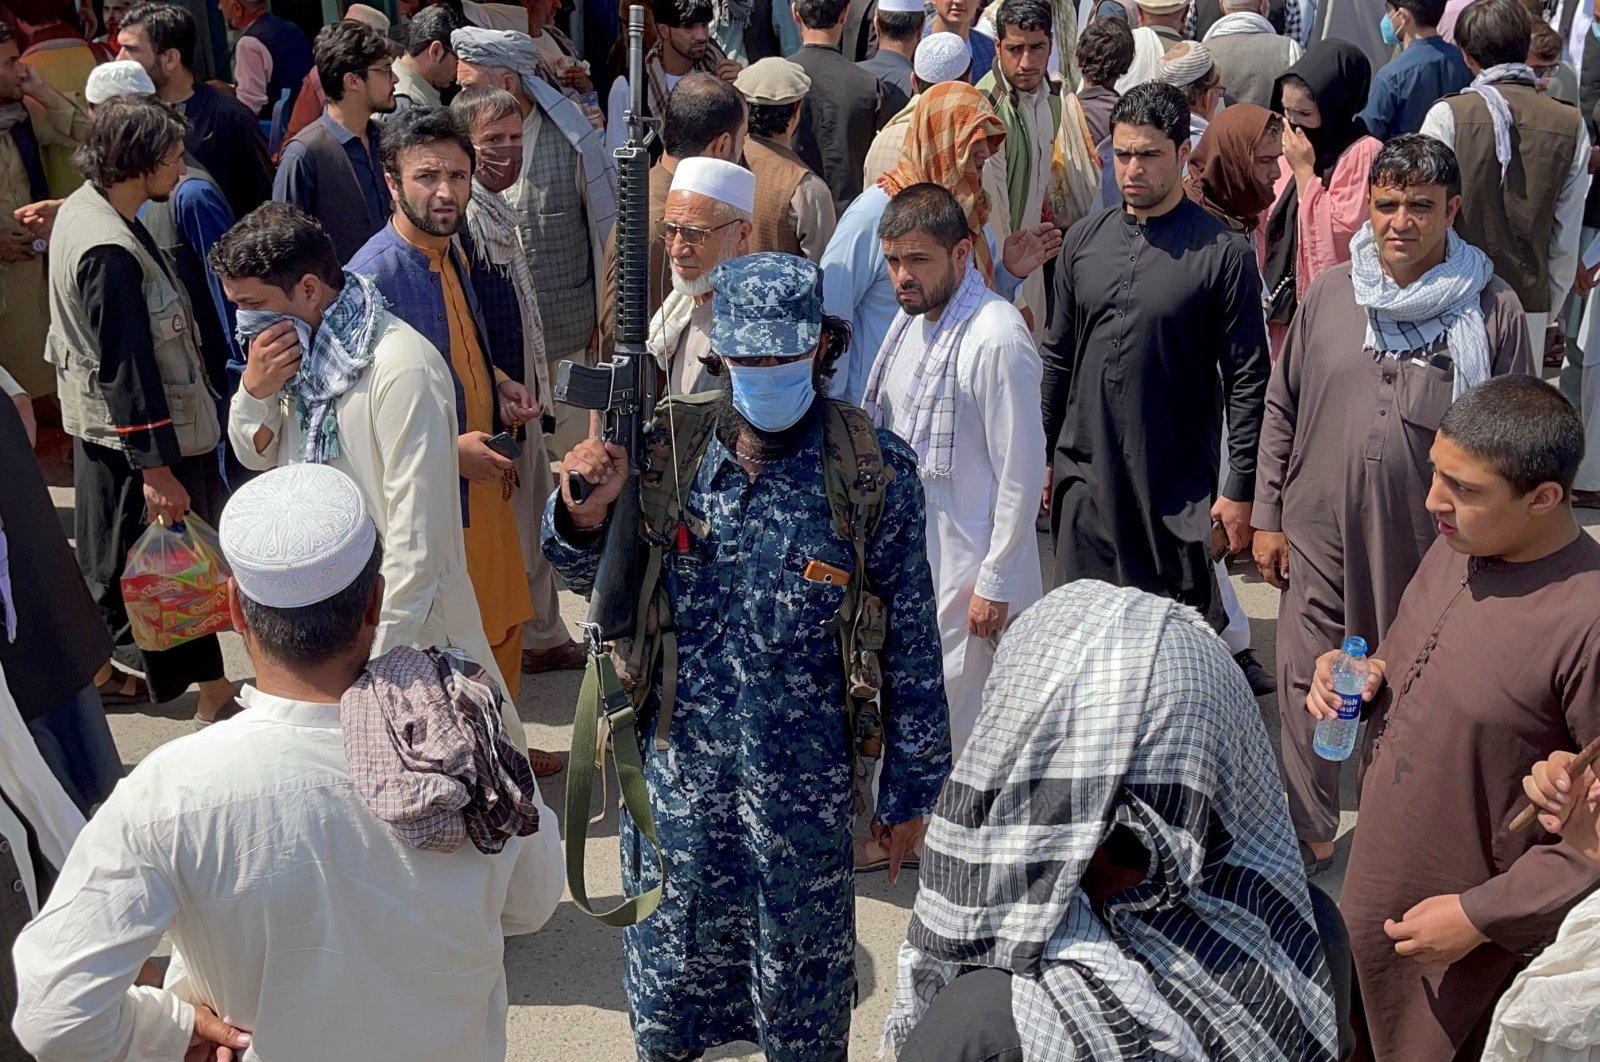 A Taliban security force member stands guard among crowds of people walking past in a street in Kabul, Afghanistan, Sept. 4, 2021. (Reuters Photo)